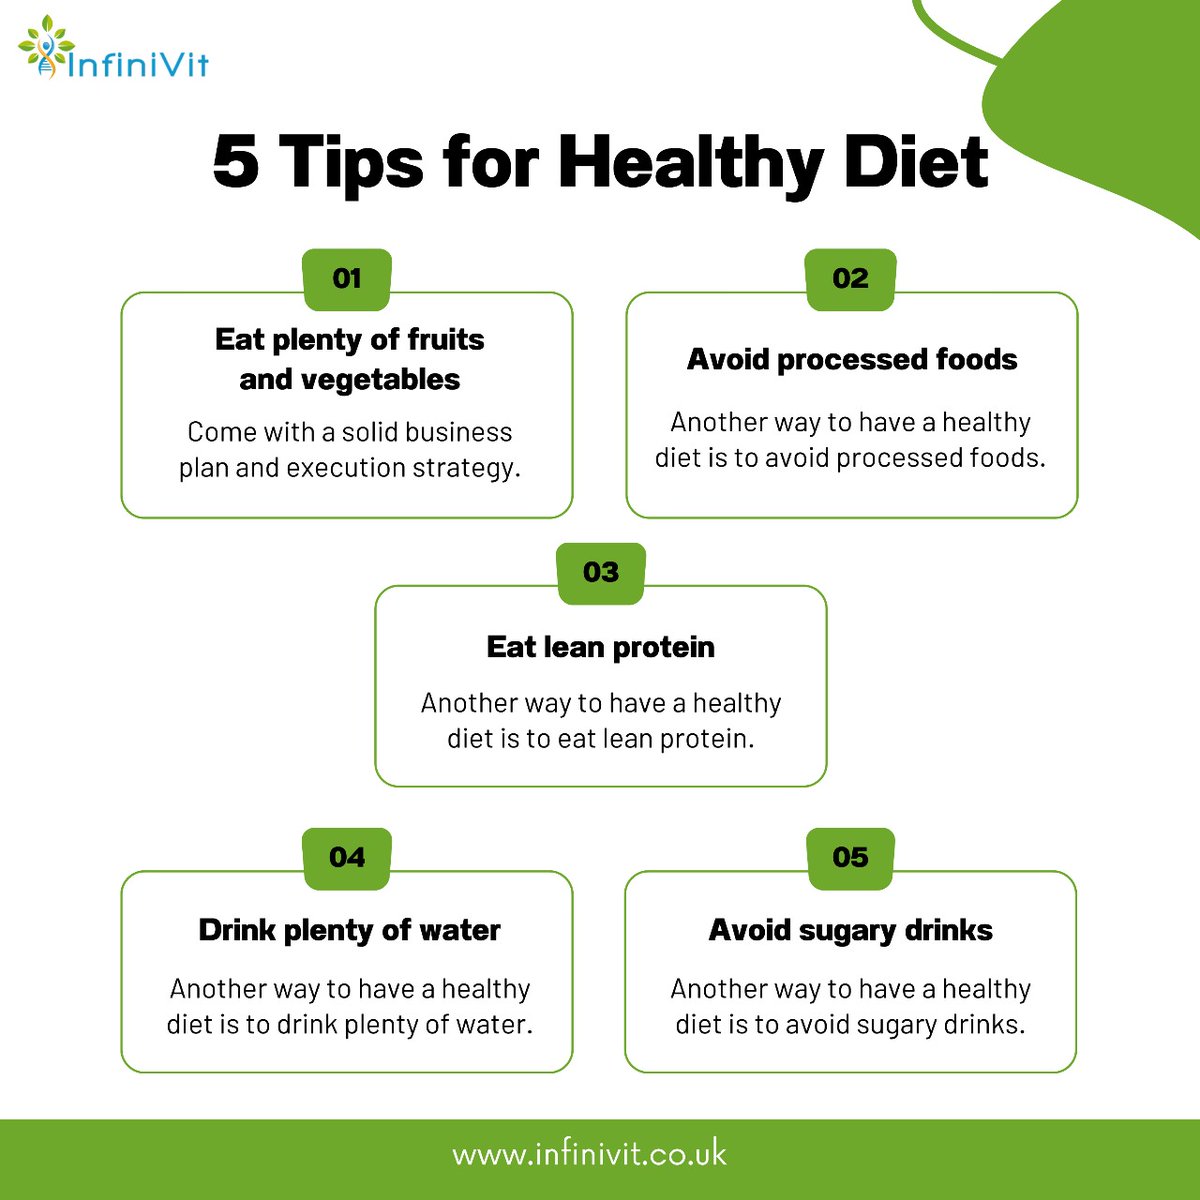 5 Tips for Healthy Diet
.
.
Shop Now: infinivit.co.uk
Email: info@infinivit.co.uk
.
.
#infinivit #HealthyEating #DietTips #Nutrition #Wellness #HealthyLifestyle #EatClean #HealthTips